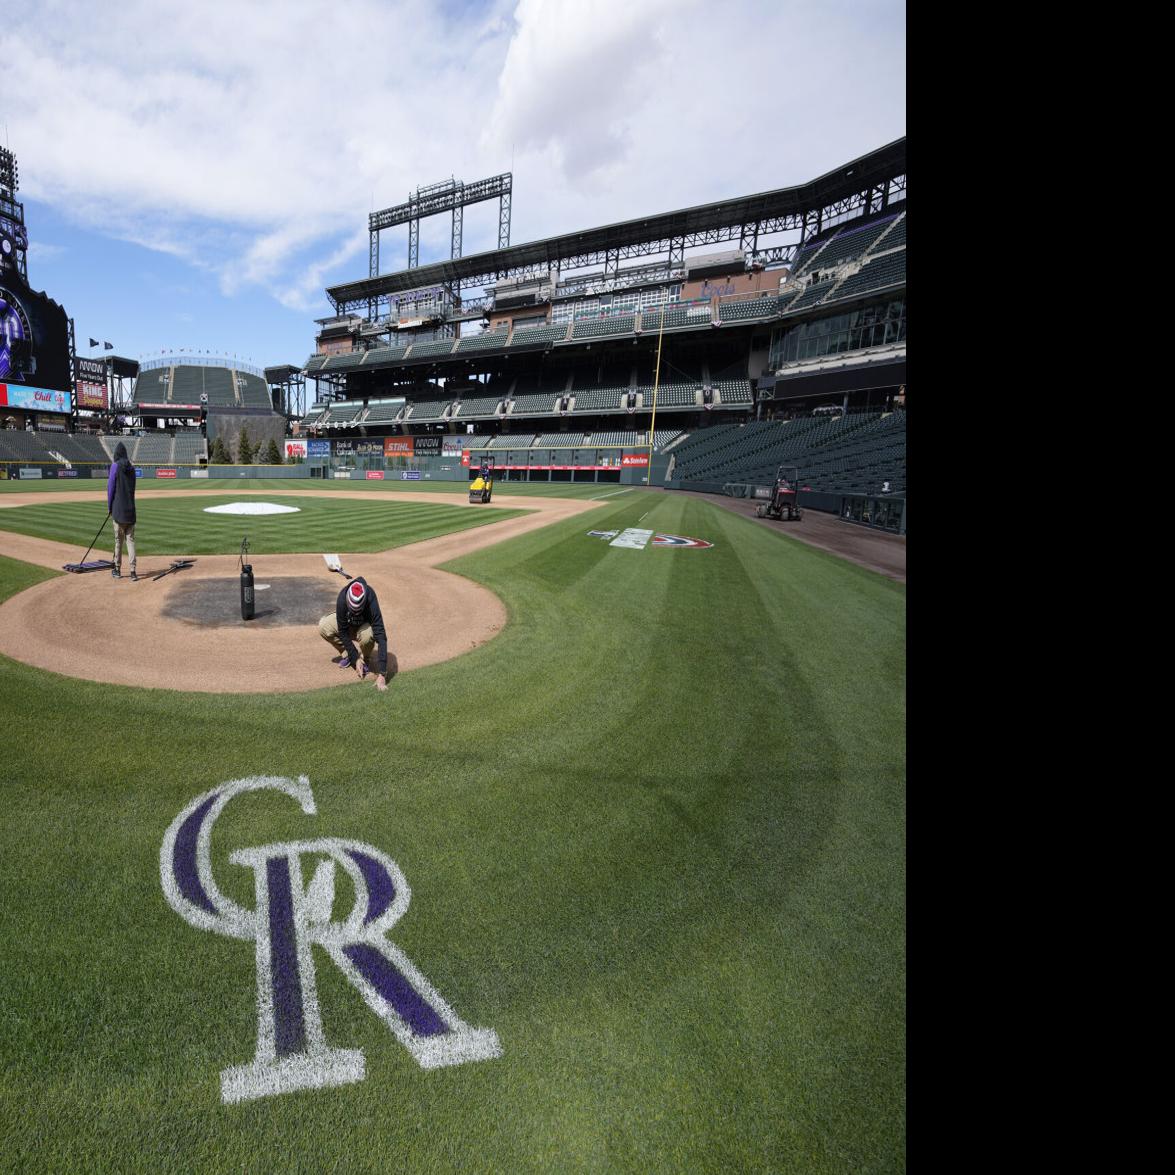 Colorado Rockies first baseman CJ Cron selected to first All-Star game, Sports